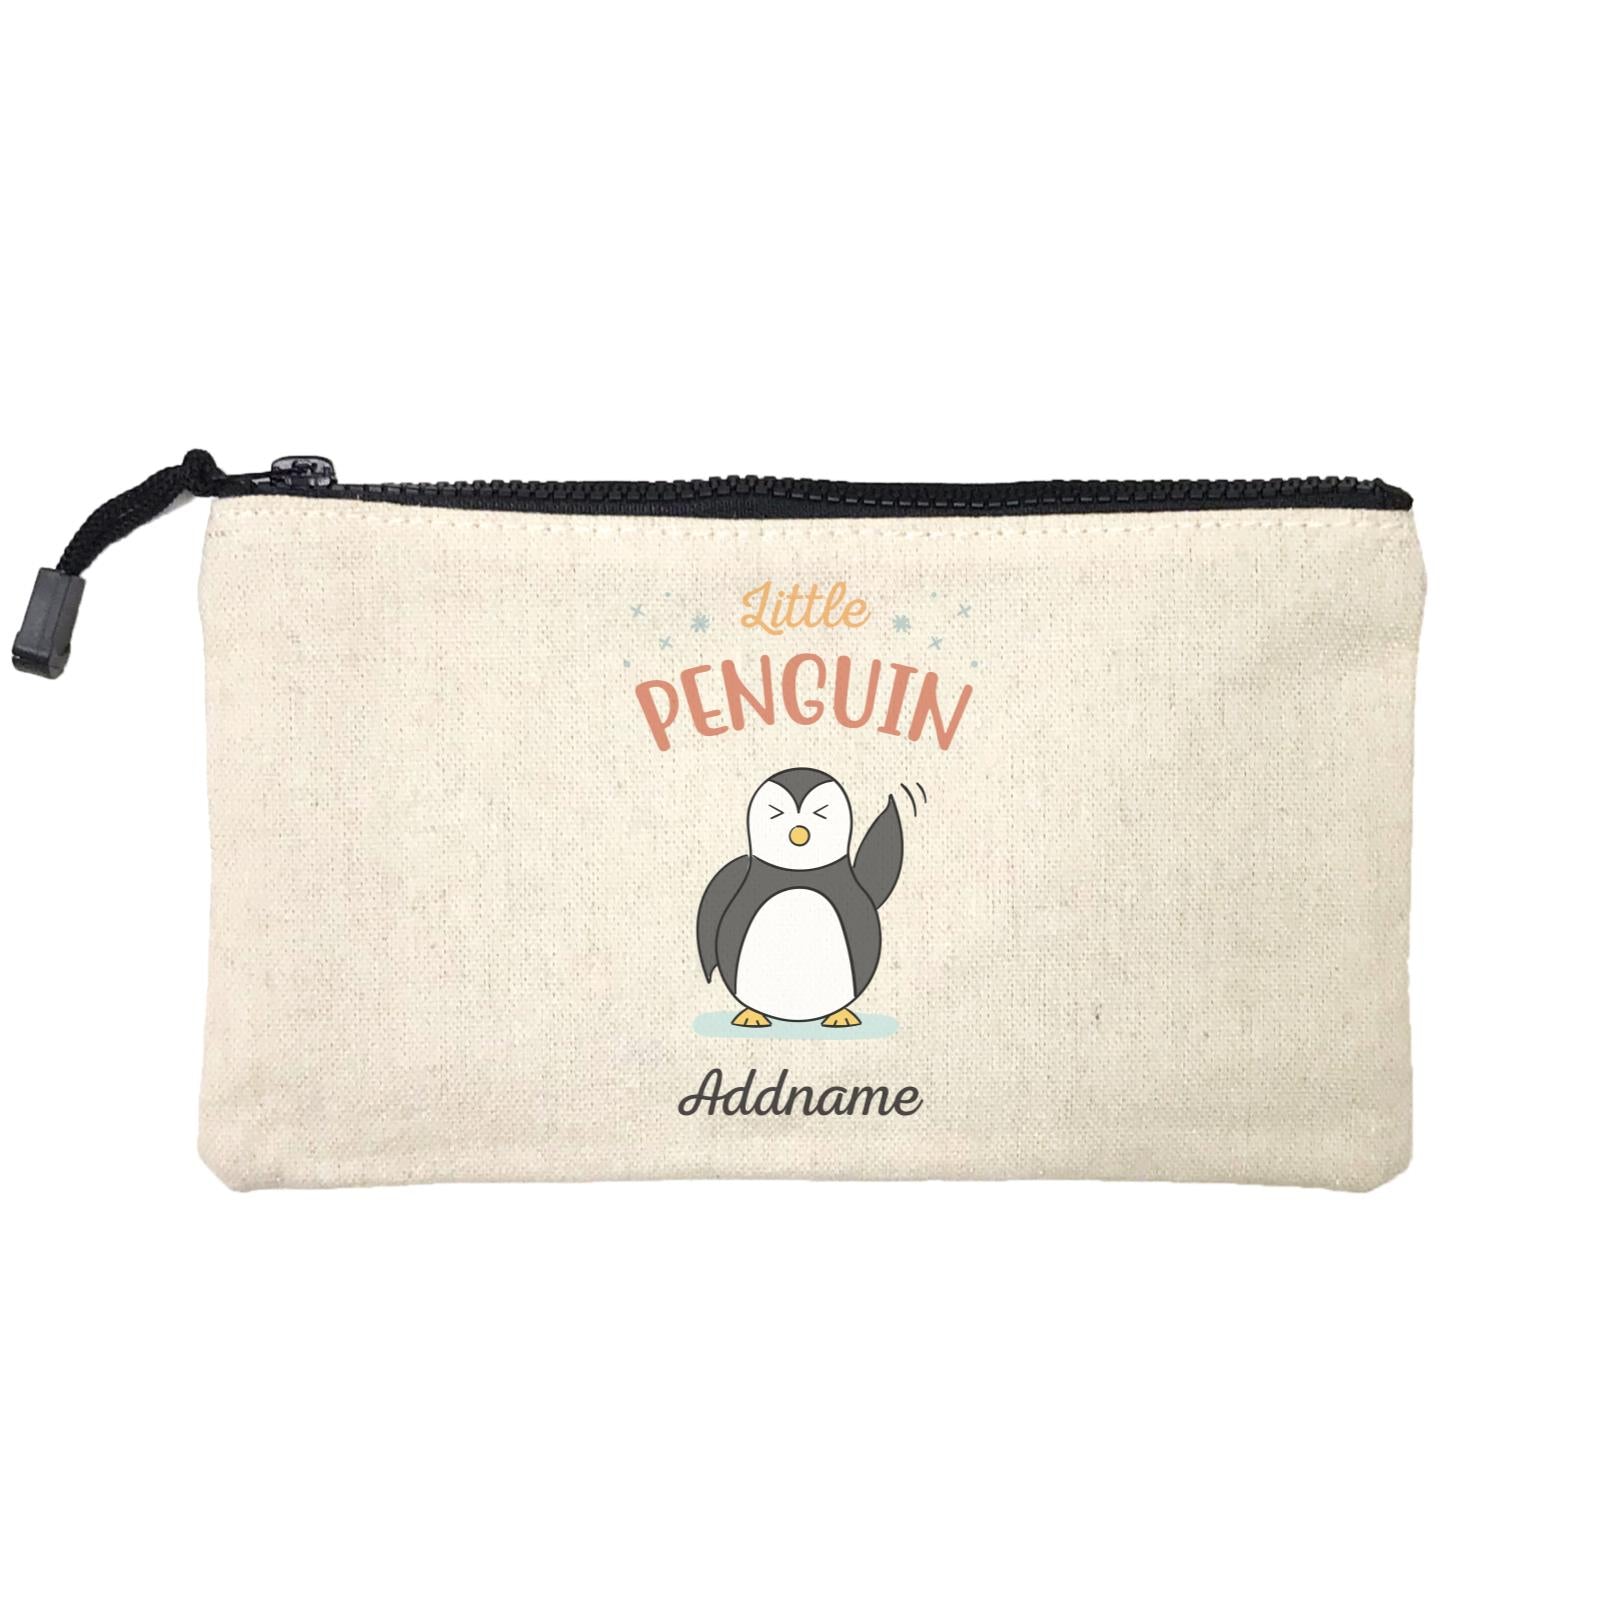 Penguin Family Little Penguin Happy Waving Hand Addname Mini Accessories Stationery Pouch